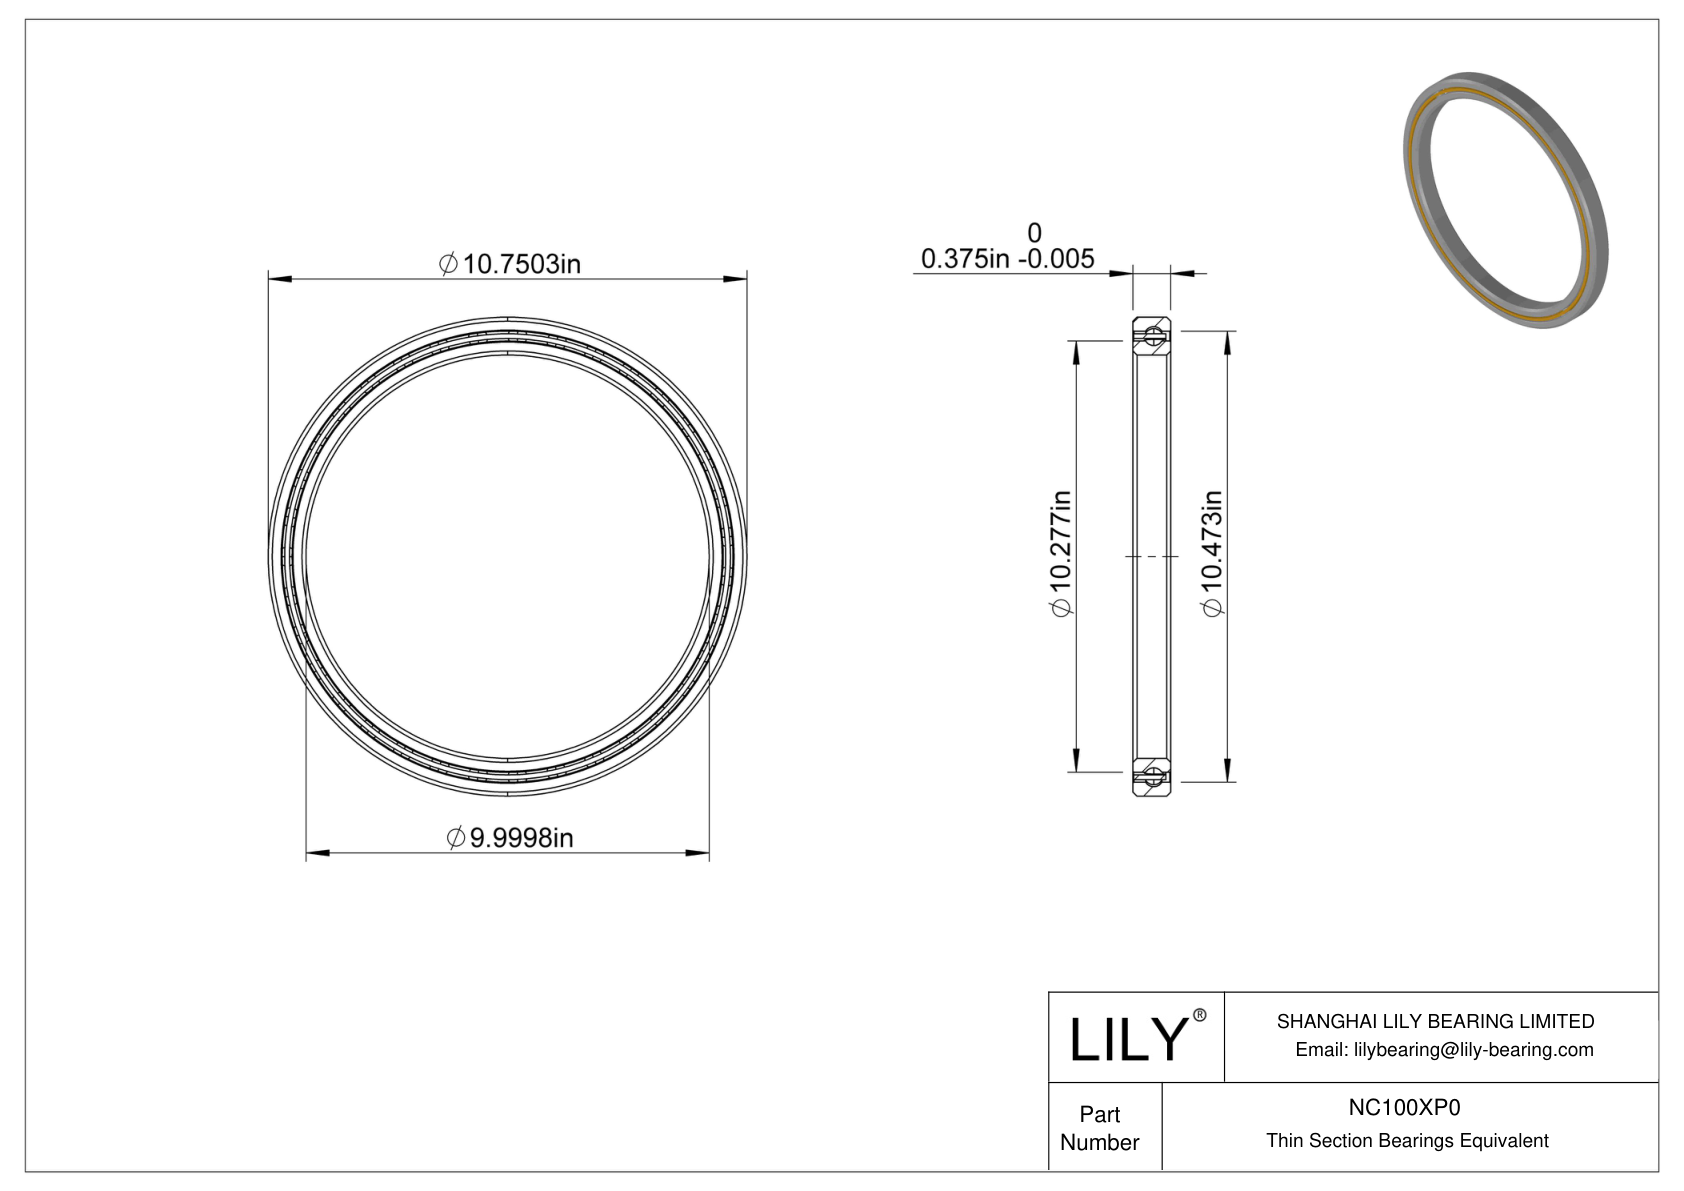 NC100XP0 Constant Section (CS) Bearings cad drawing